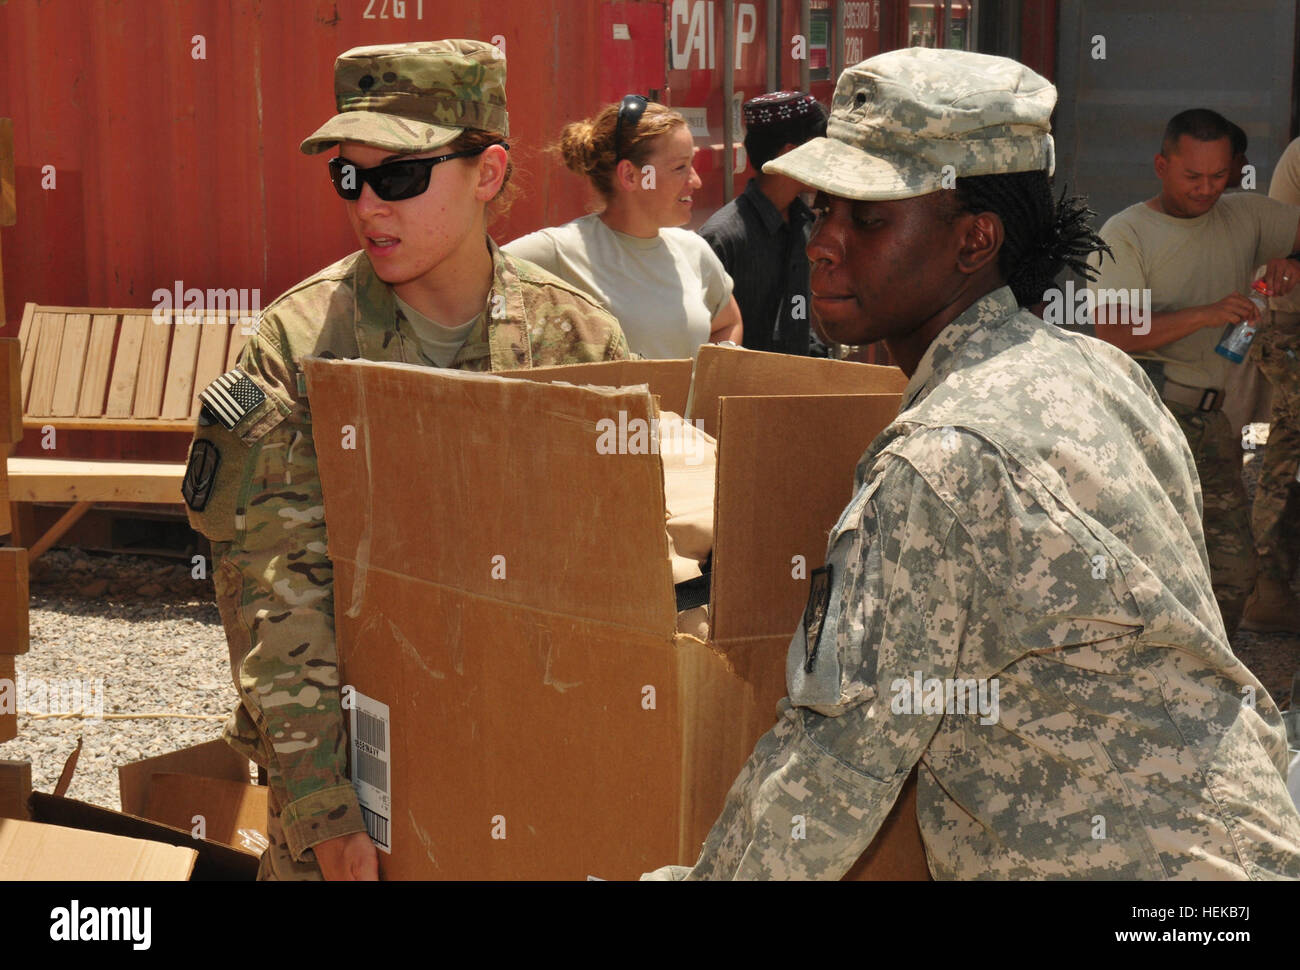 U.S. Army service members carry boxes of donated school supplies to be distributed to local Afghan children attending the Kandahar Airfield Bazaar School June 25. The school supplies were provided through a unique collaboration between Mid-Gulf Forestry Inc. and students from Parklane Academy in McComb, Miss. Mississippi Army National Guard soldiers donate backpacks and school supplies to Afghan children 424532 Stock Photo